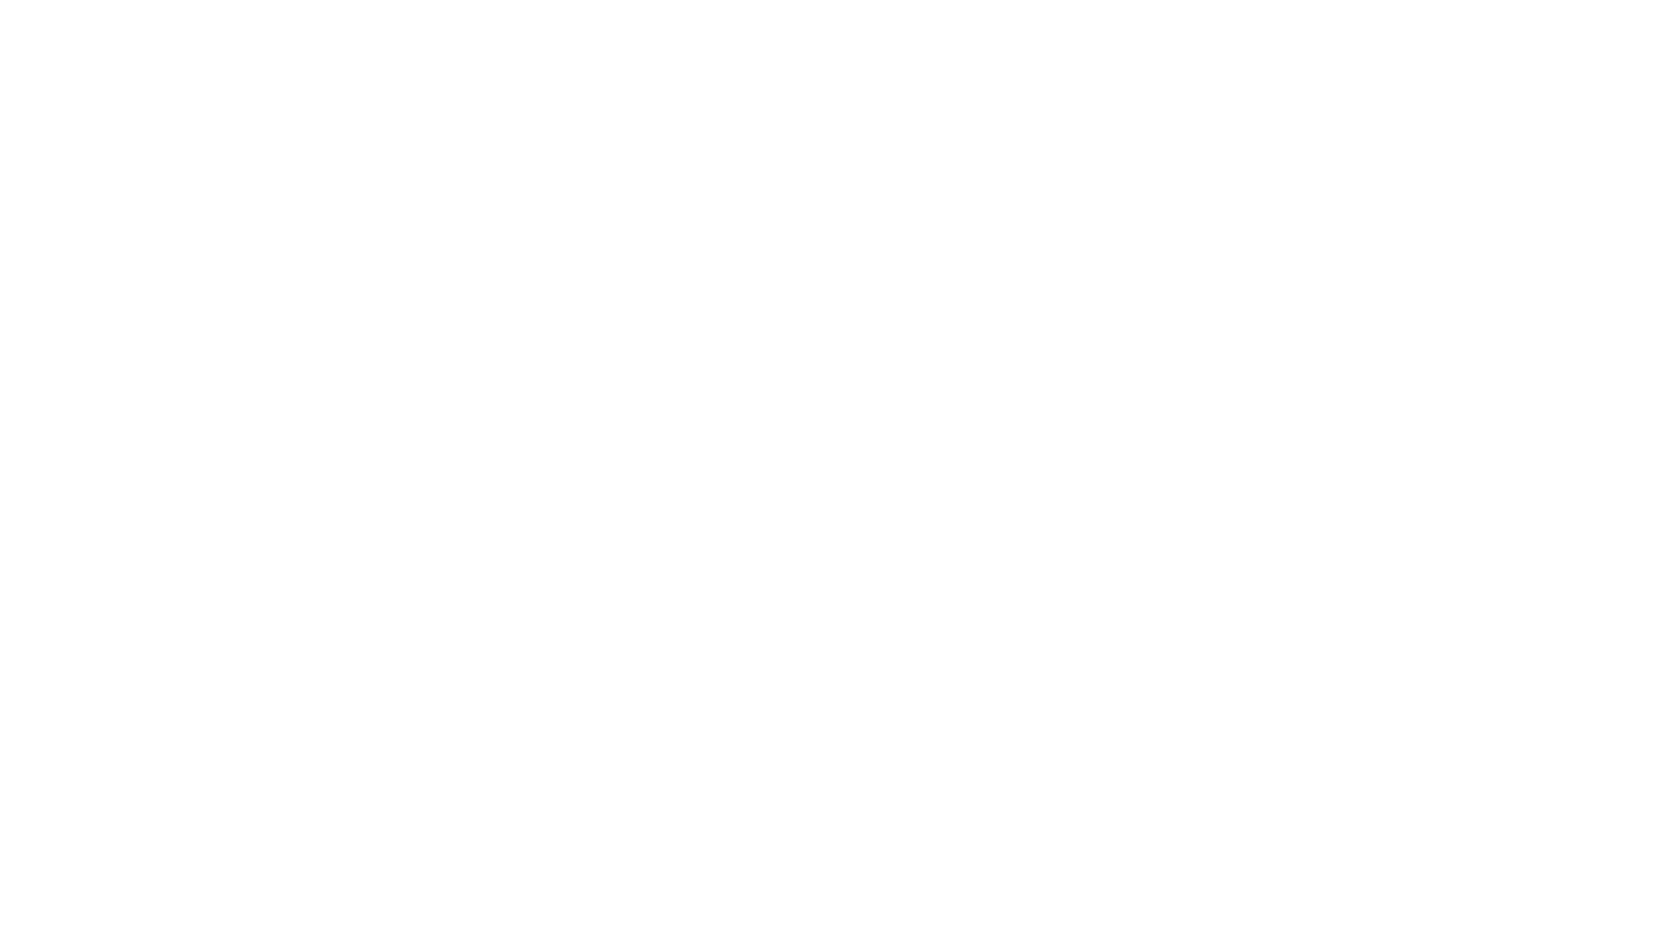 Flat Rock Cellars Scrolled light version of the logo (Link to homepage)